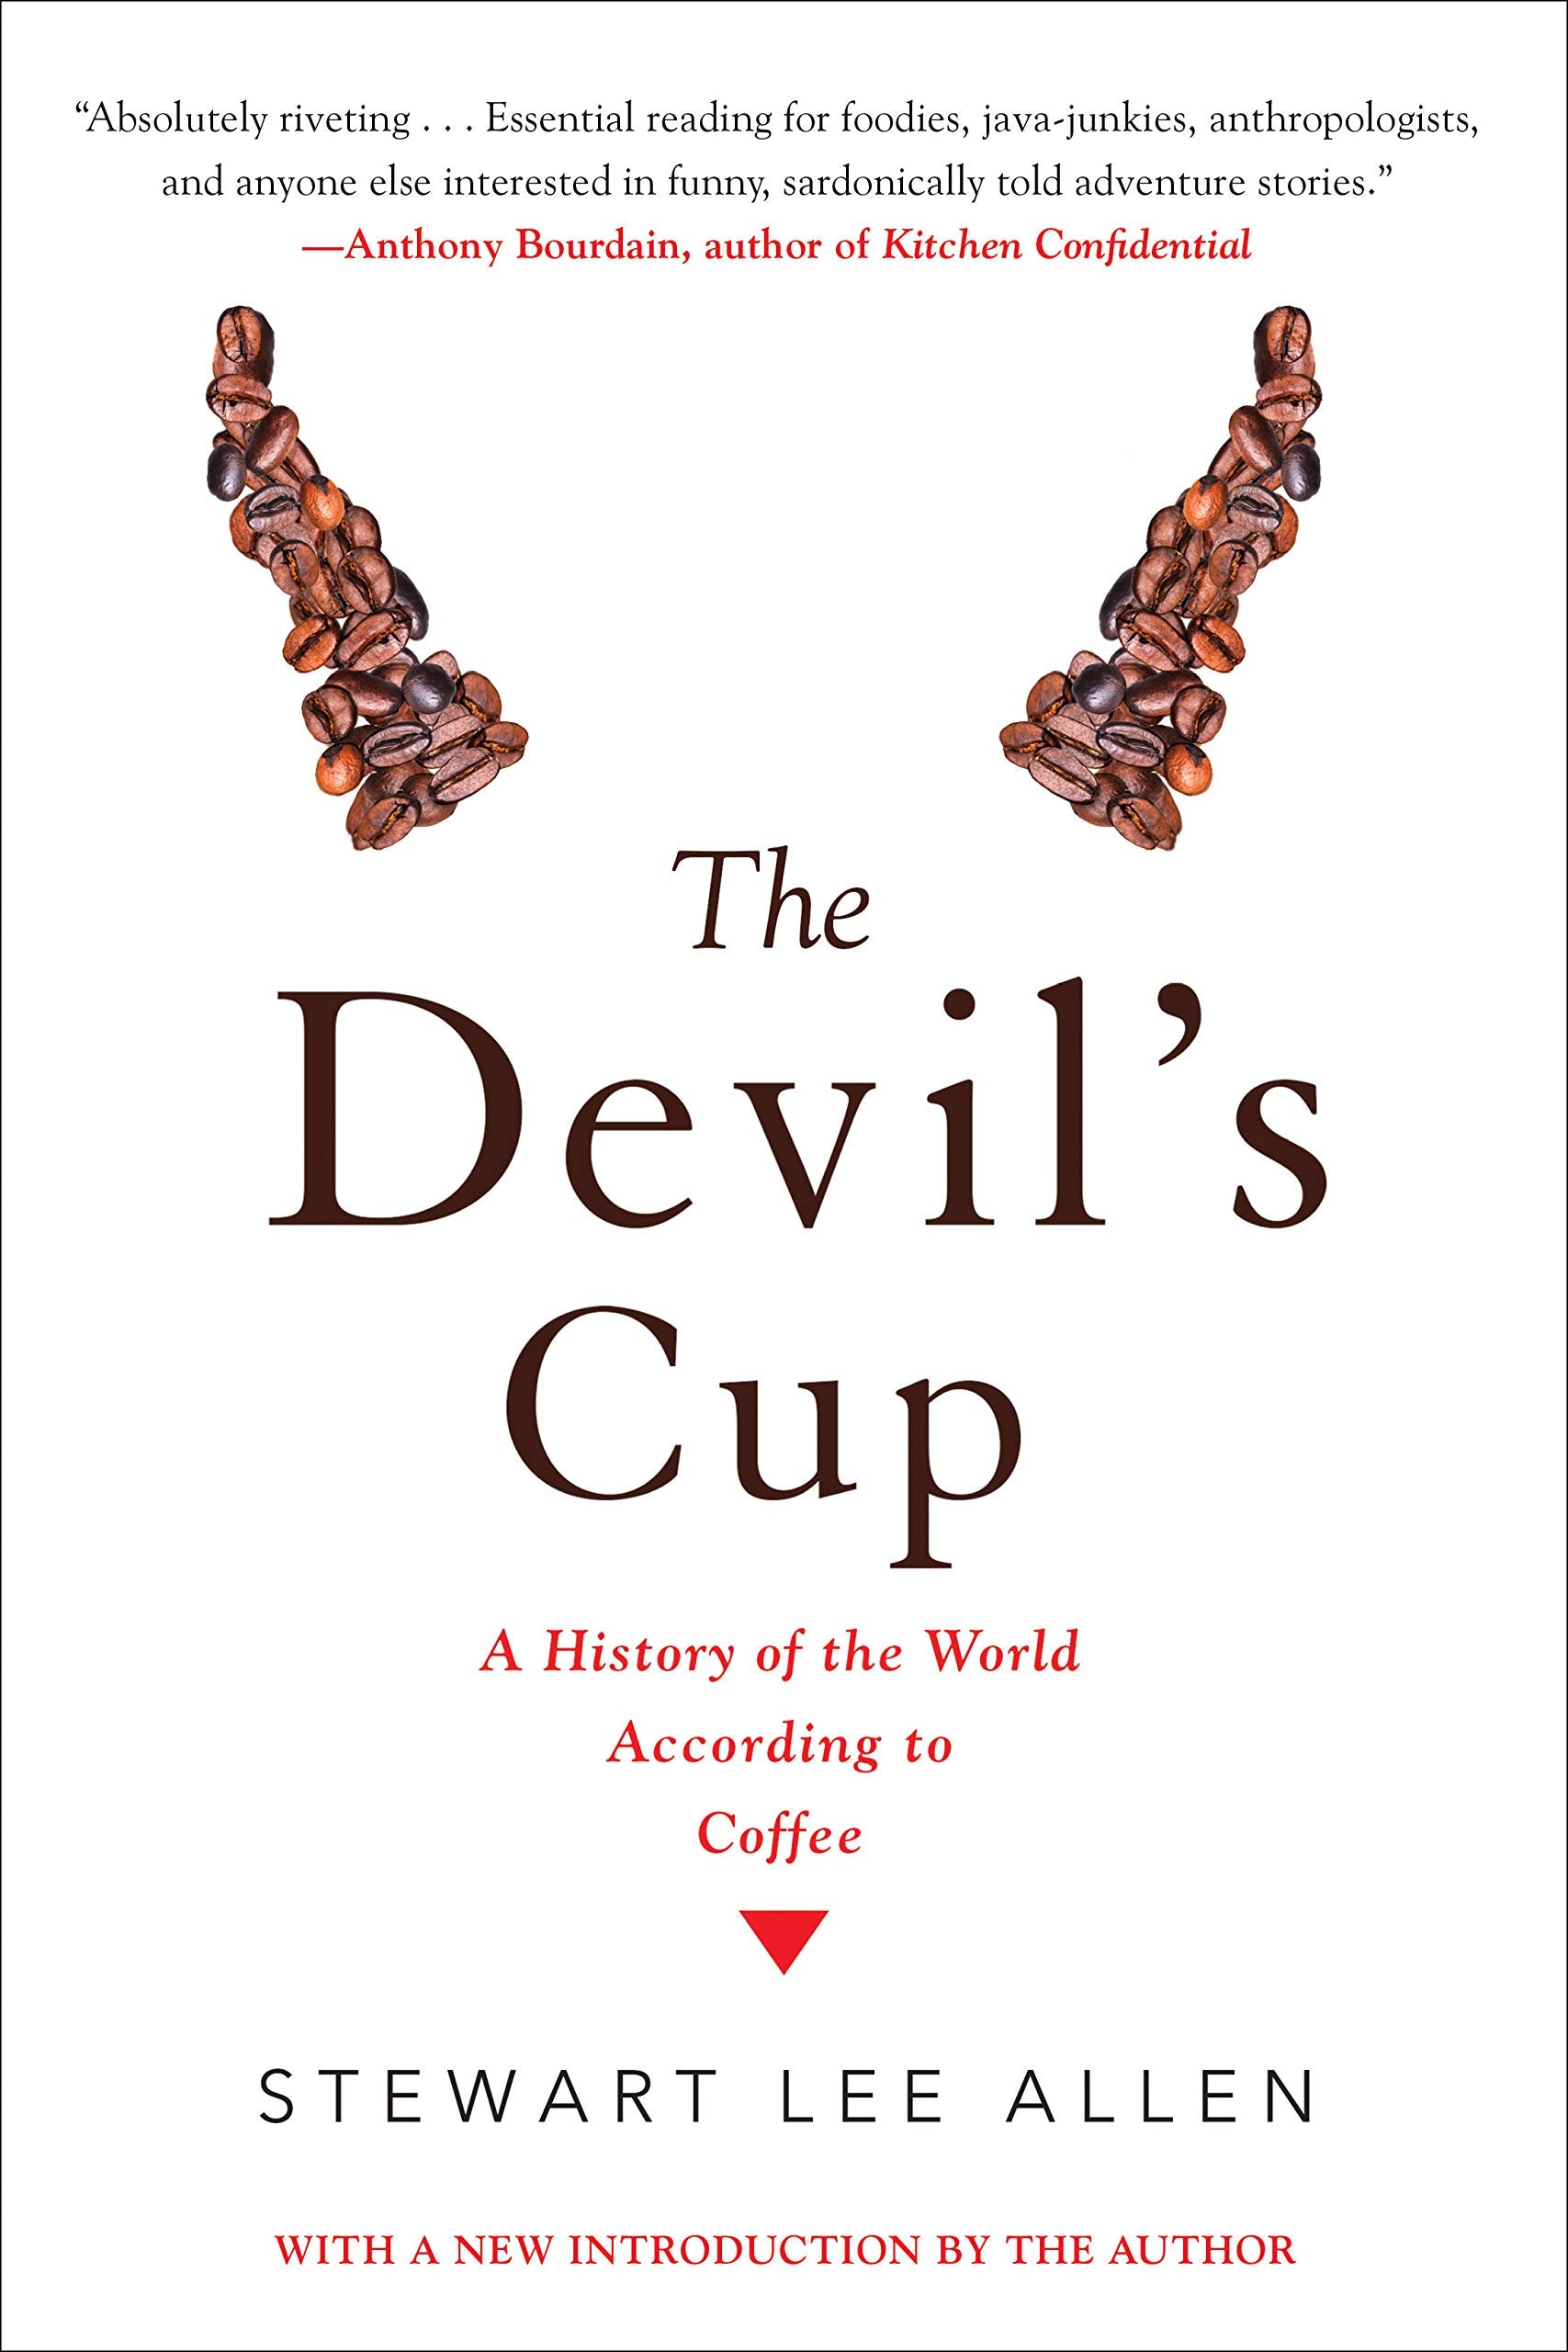 The Devil's Cup: A History of the World According to Coffee (Stewart Lee Allen)